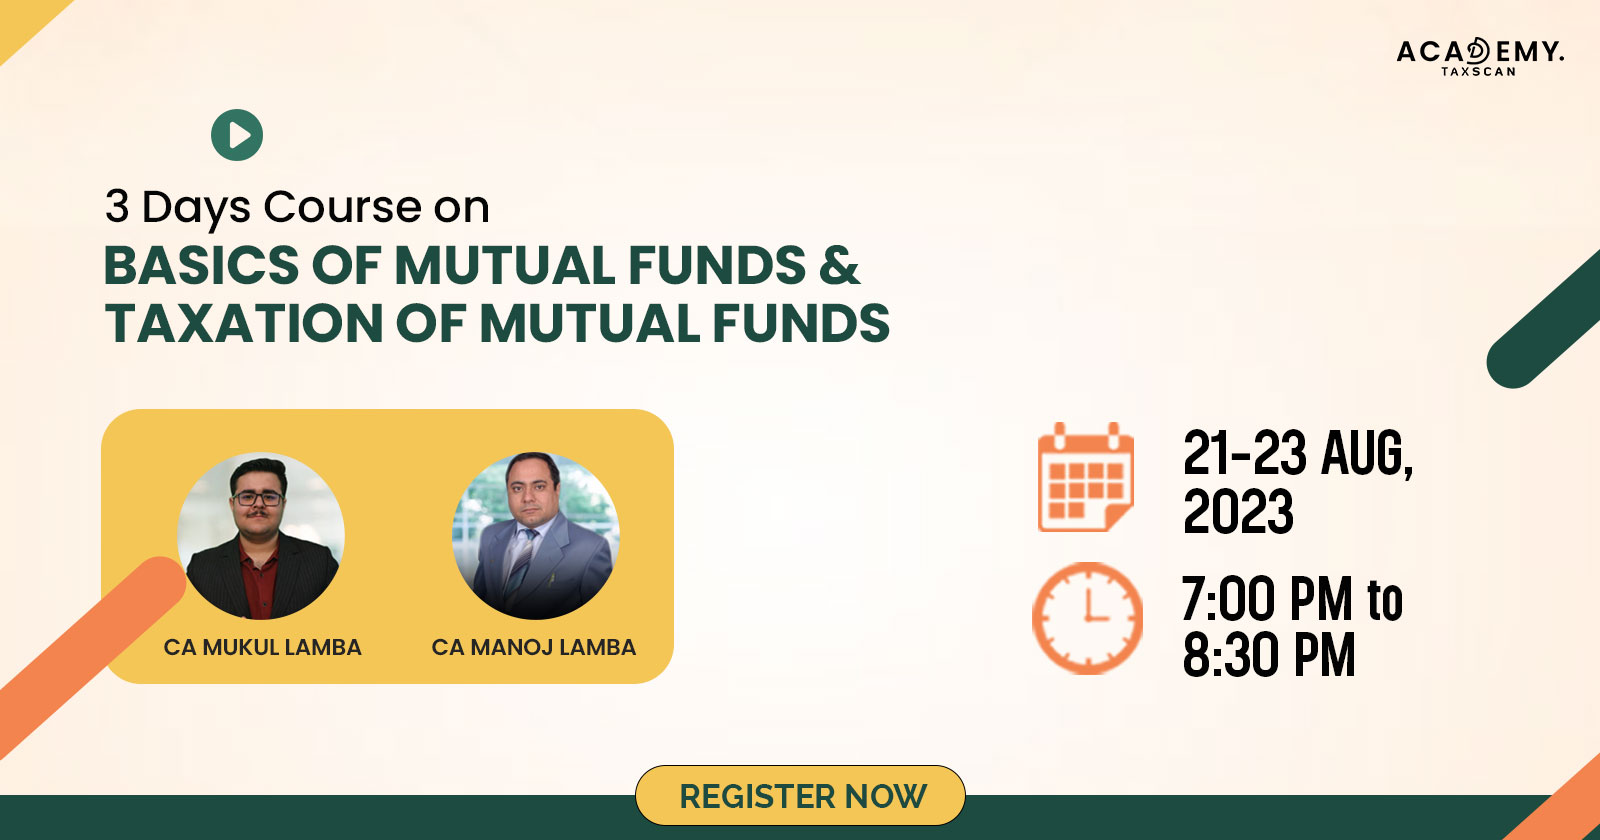 3 Days Course on Basics of Mutual Fund - 3 Days Course - Mutual Fund - Taxation of Mutual Funds - Taxation - online certificate course - Taxscan Academy